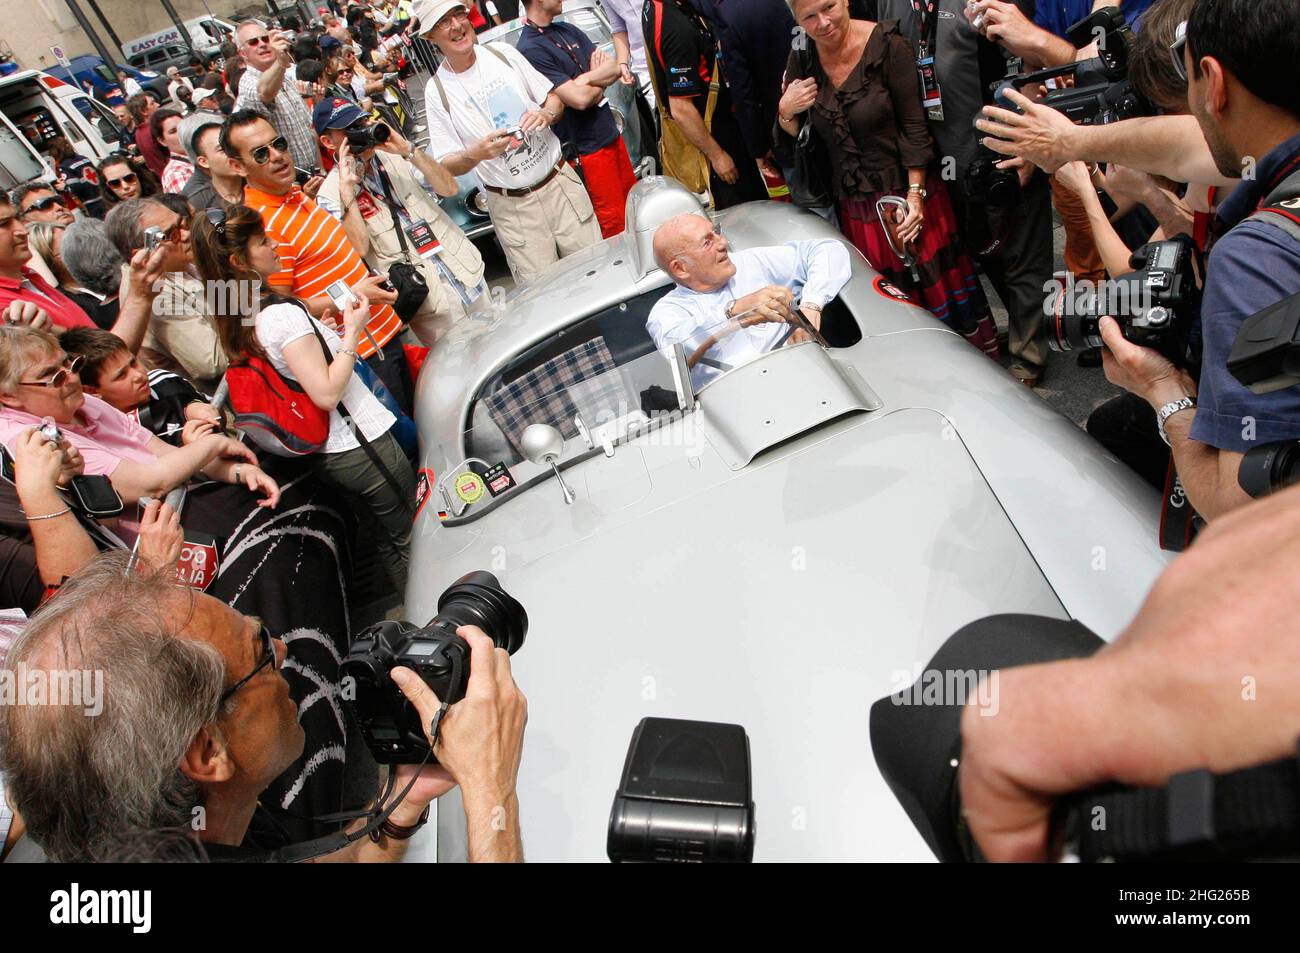 Stirling Moss at the Mille Miglia Vintage Car Race in Brescia, Italy. Stock Photo